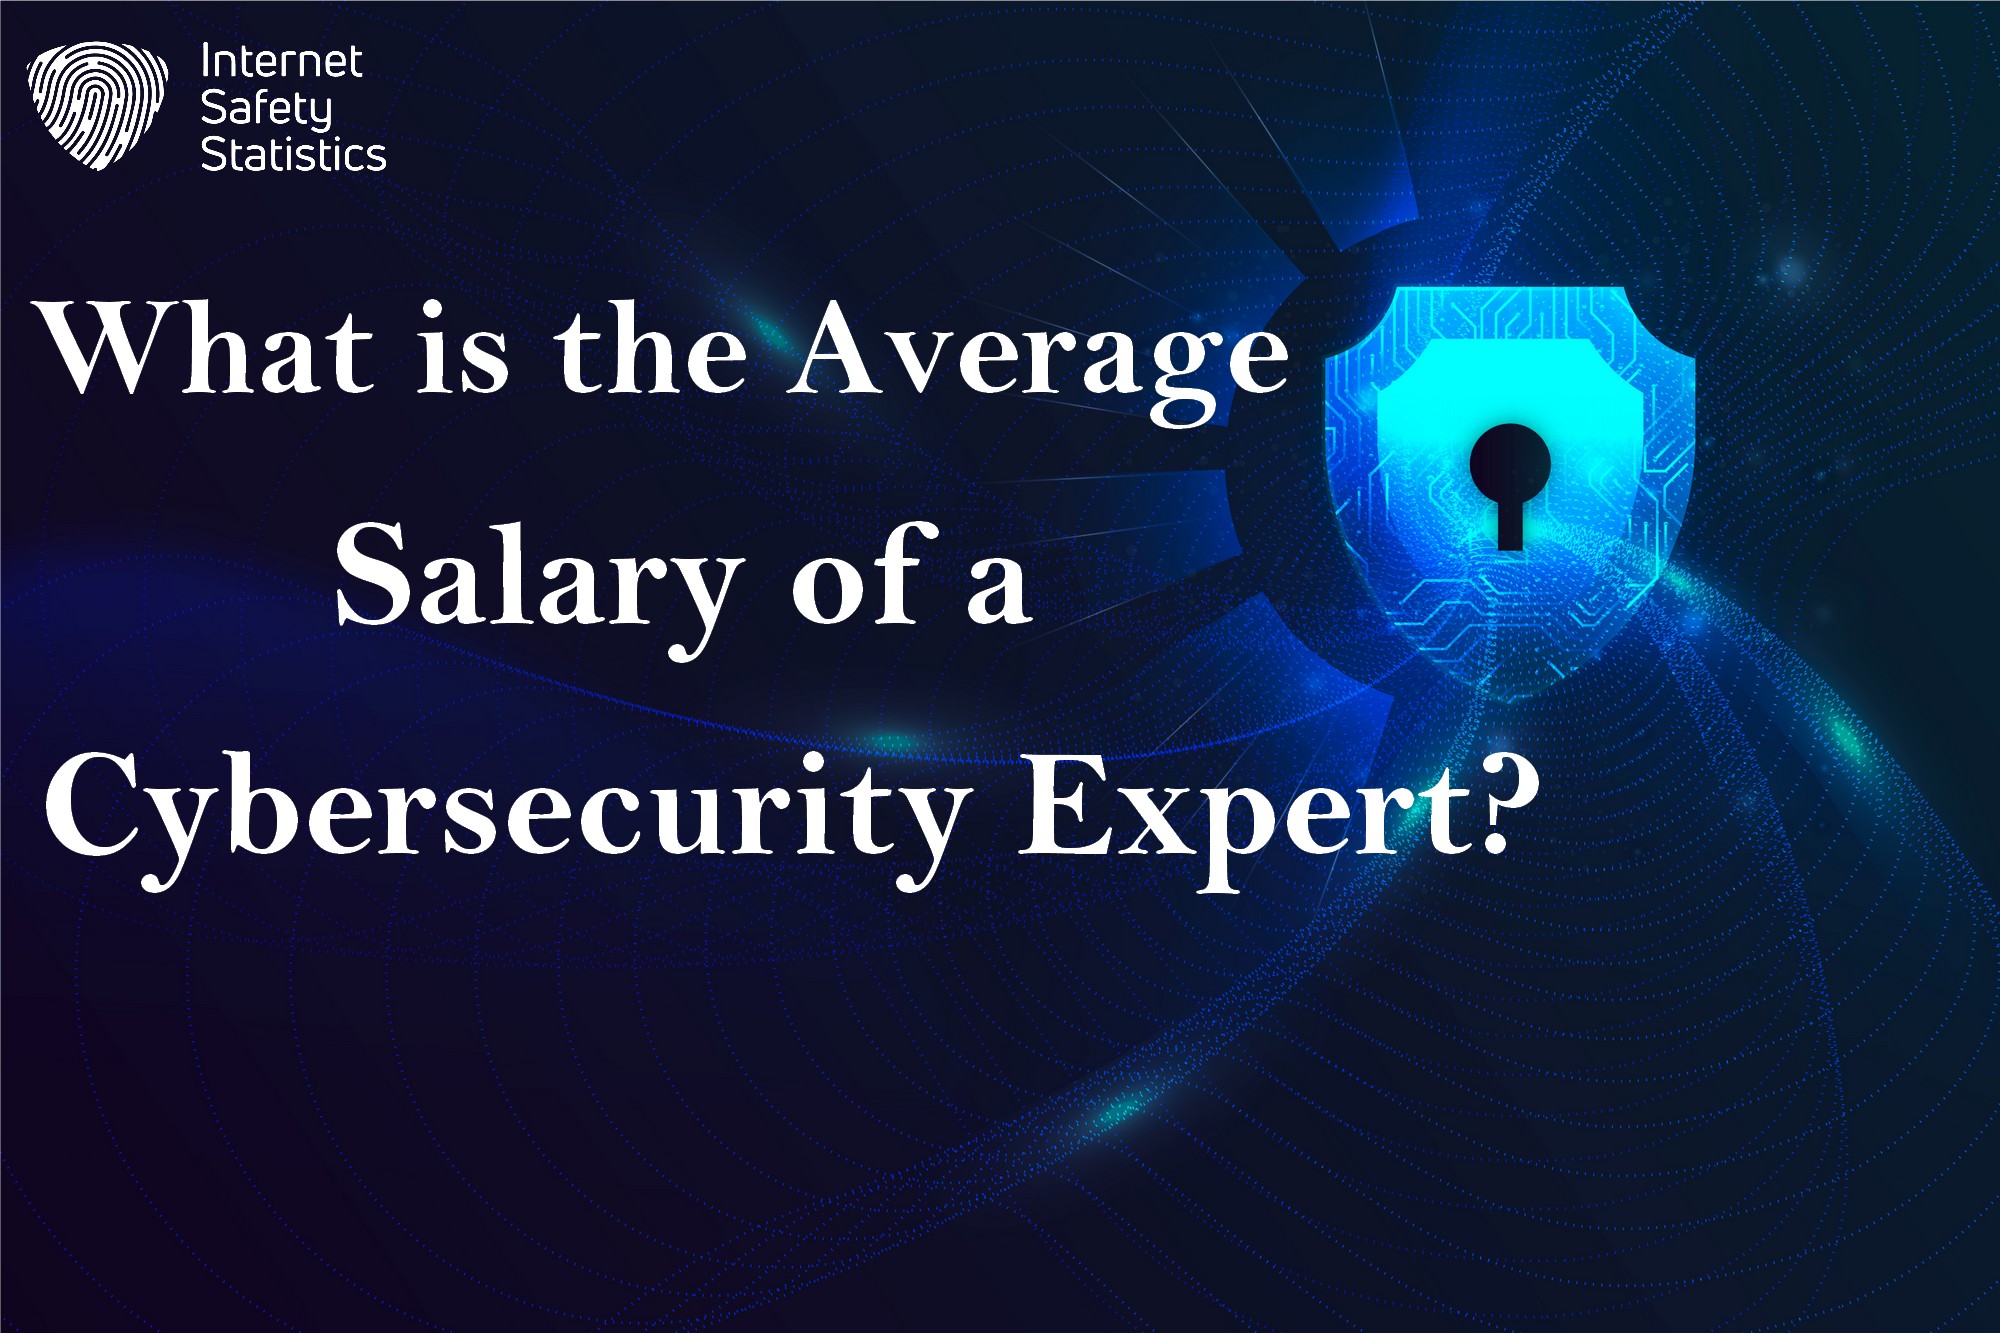 How to Become a Cybersecurity Expert? What is the Average Salary of a Cybersecurity Expert?